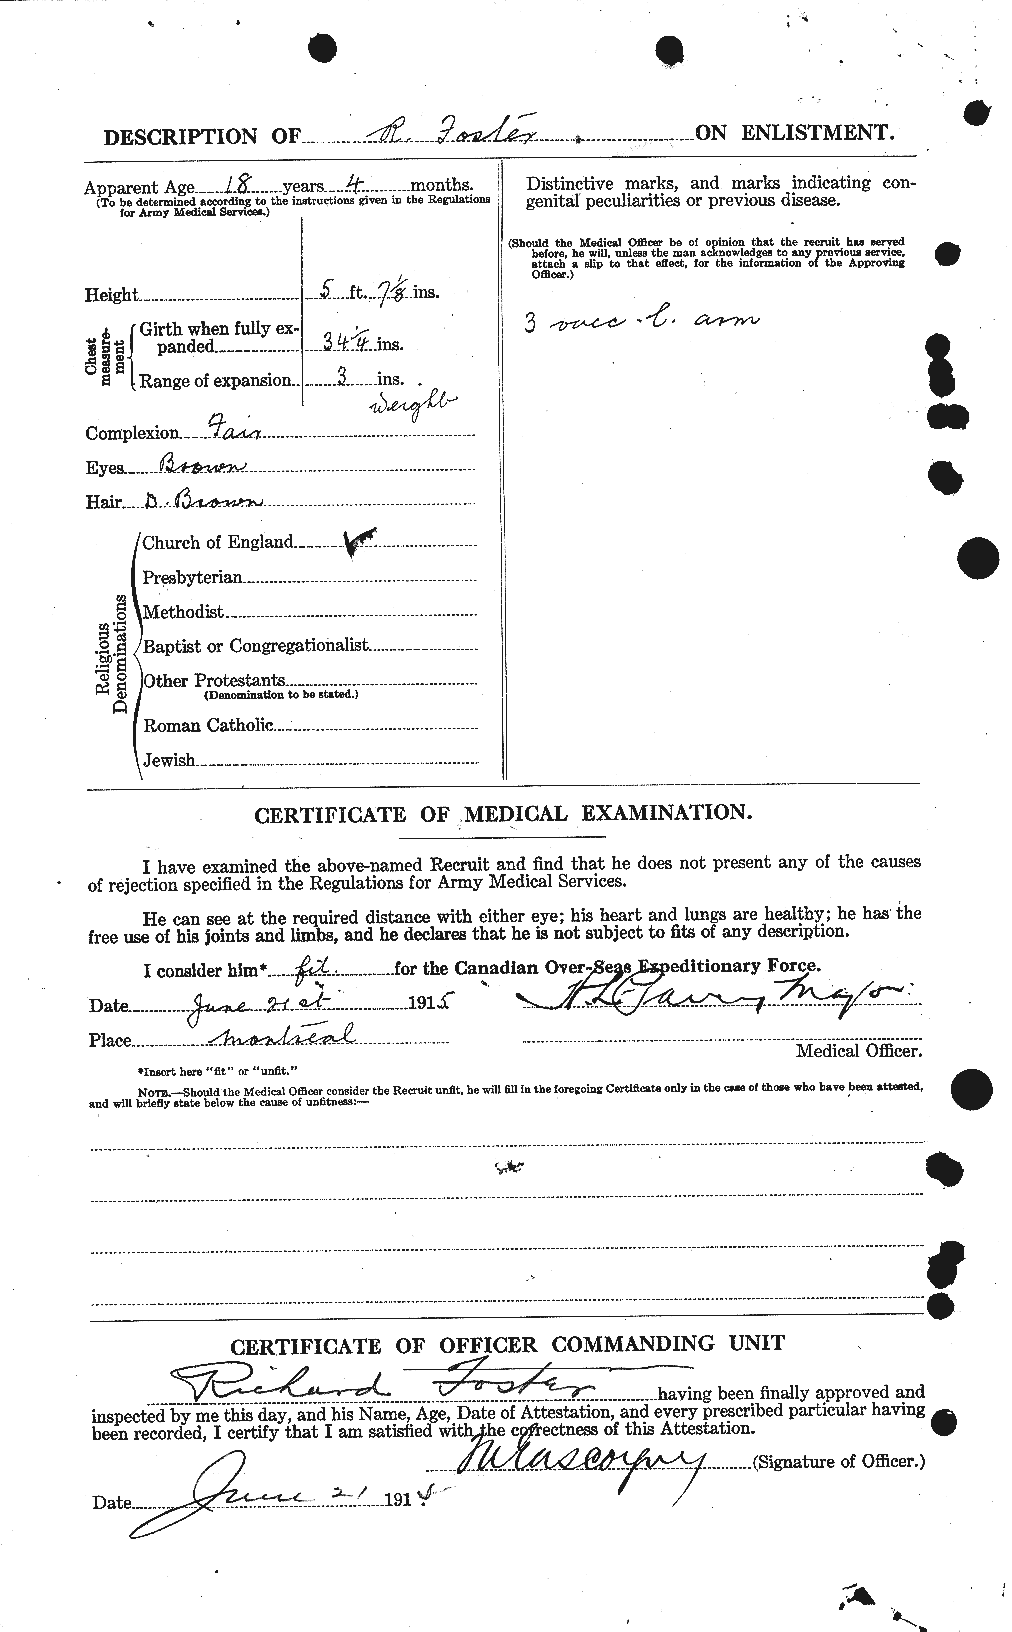 Personnel Records of the First World War - CEF 335158b